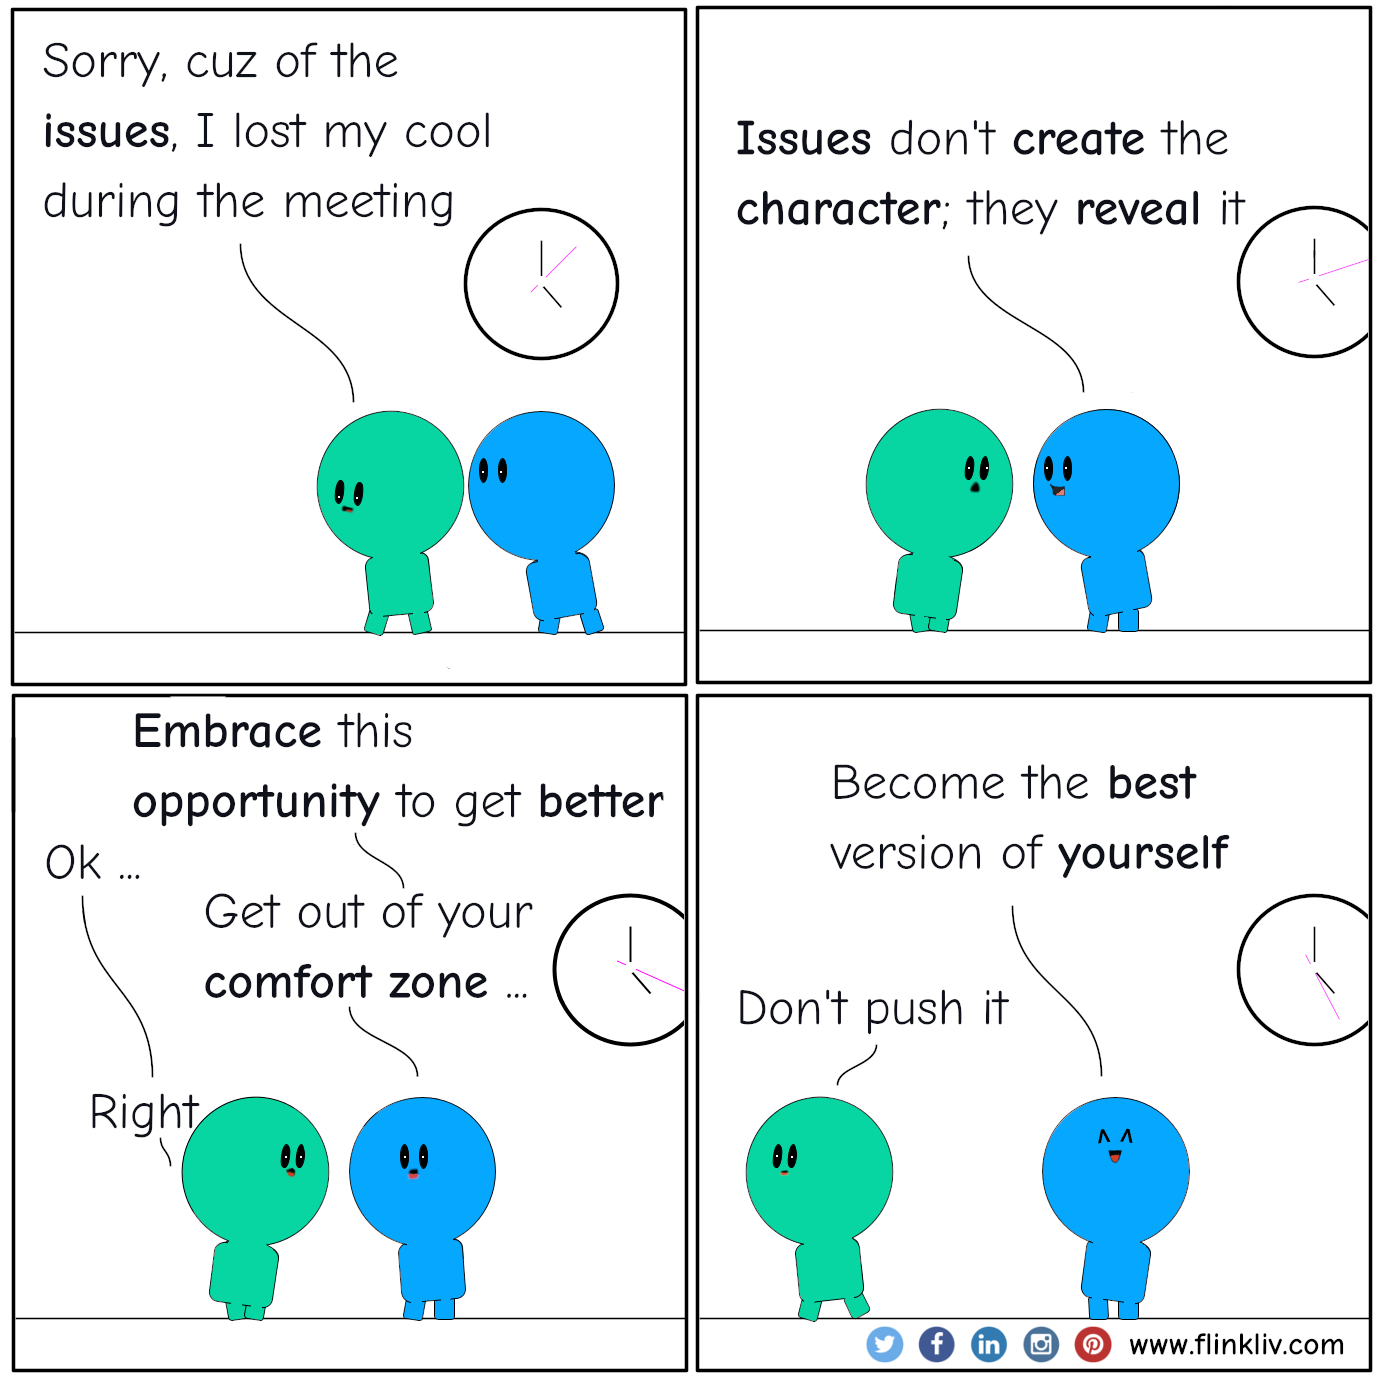 Conversation between A and B about reverse thinking in turn crisis to opportunity. 
            A: Sorry I lost my cool during the meeting (main characters walking out of the room,  with just heads visible there is a clock on the hallway).
			It is cuz of those issues.

			B: Issues don't create the character; they reveal it. (characters keep walking).
			A: So, what am I supposed to do?

			B: Embrace this opportunity to get better.
			A: Ok.
			B: Get out of your comfort zone.
			A: Right.
			B: Become the best version of yourself (glowing eyes, stoping behind the green one).
			B: Don't push it (the blue one keep walking head down).
			